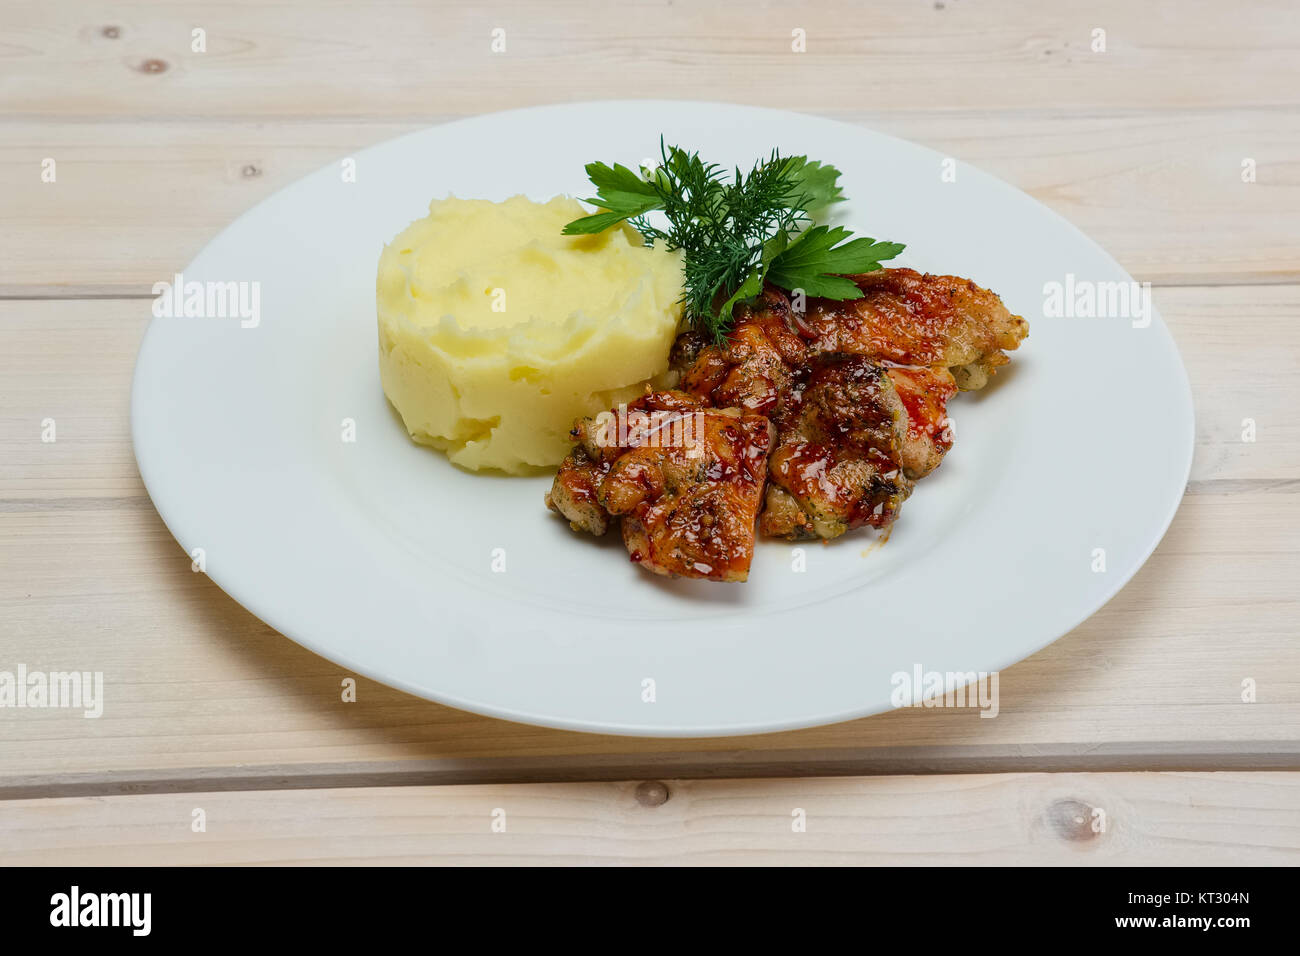 Portion of delicious fried meat in honey sauce with mashed potato Stock Photo